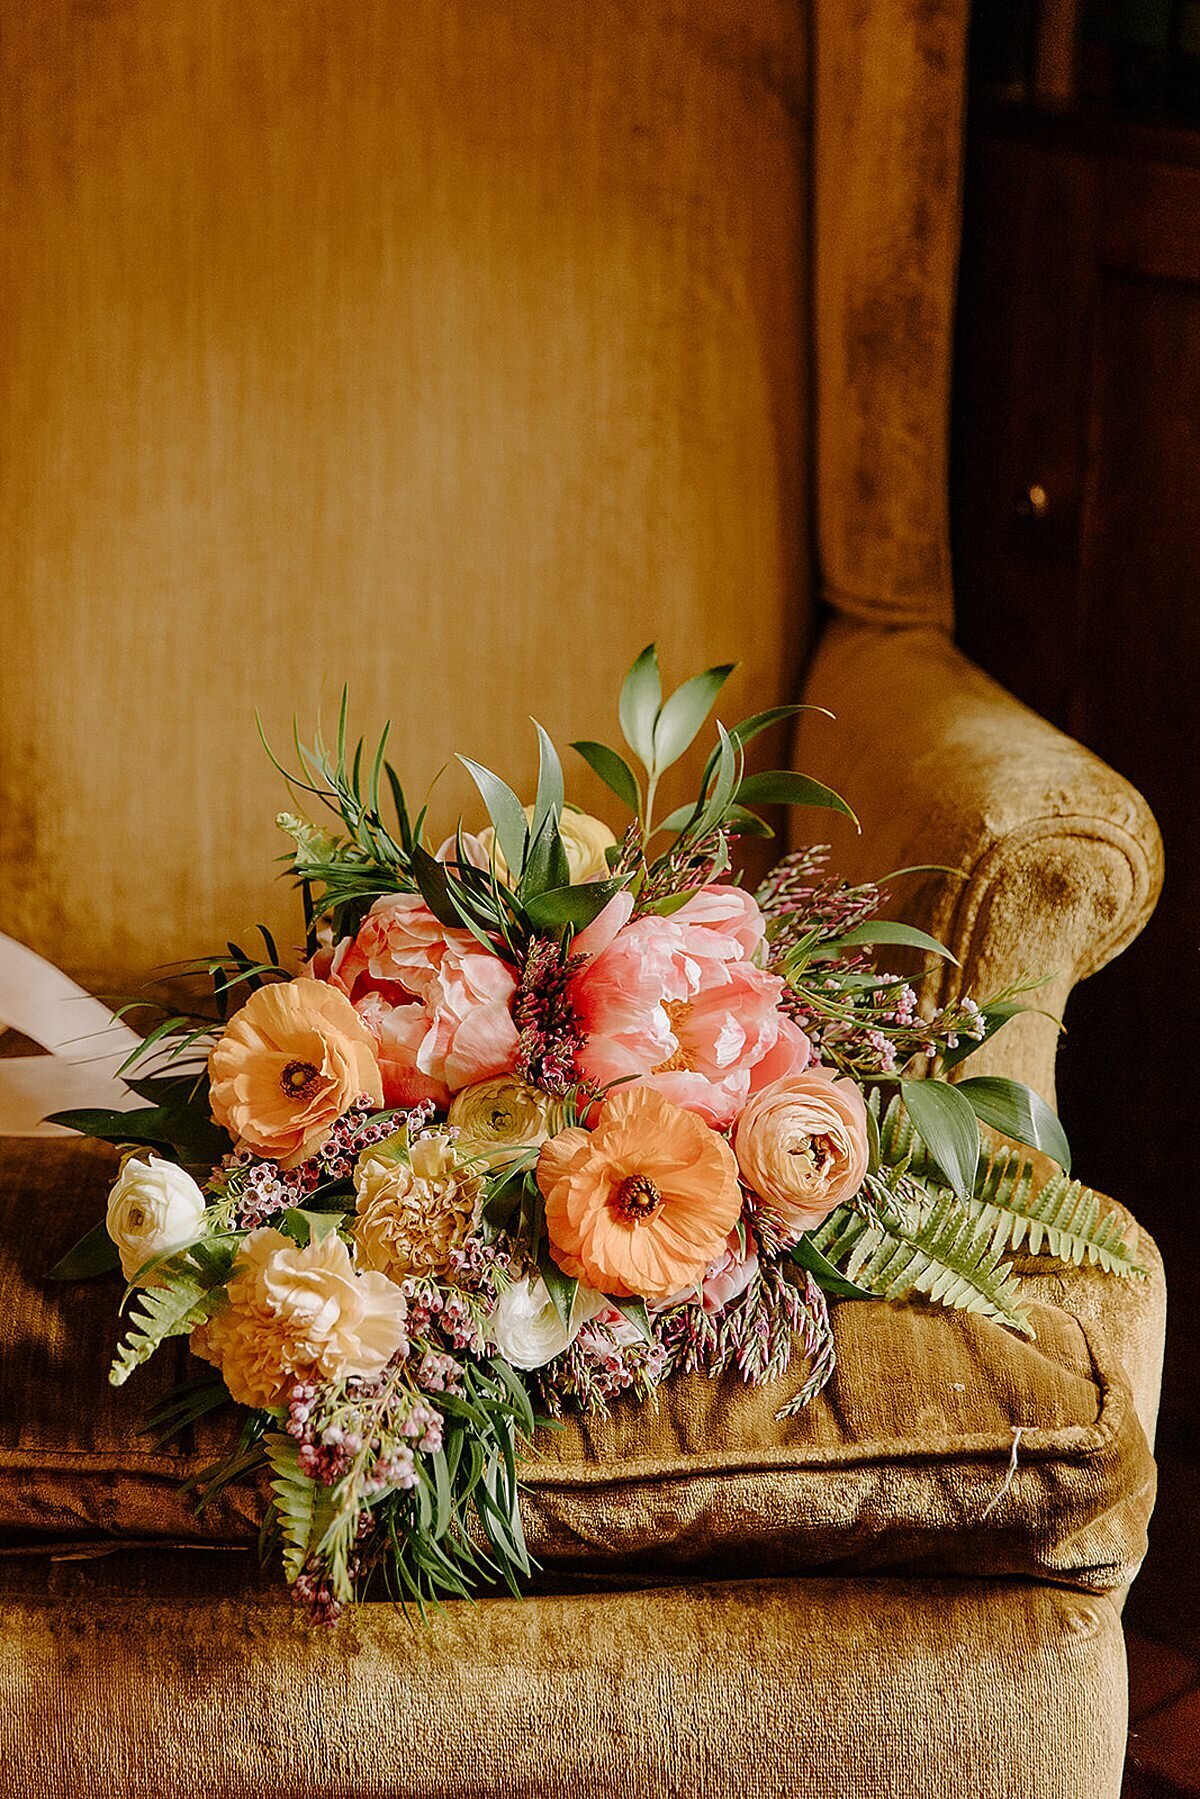 Mustard gold velvet wingback chair with a large bridal bouquet of orange ranunculus, pink peonies, fern, eucalyptus, ivory ranunculus, light brown carnations purple wax flower and greenery wrapped in ivory satin ribbon.